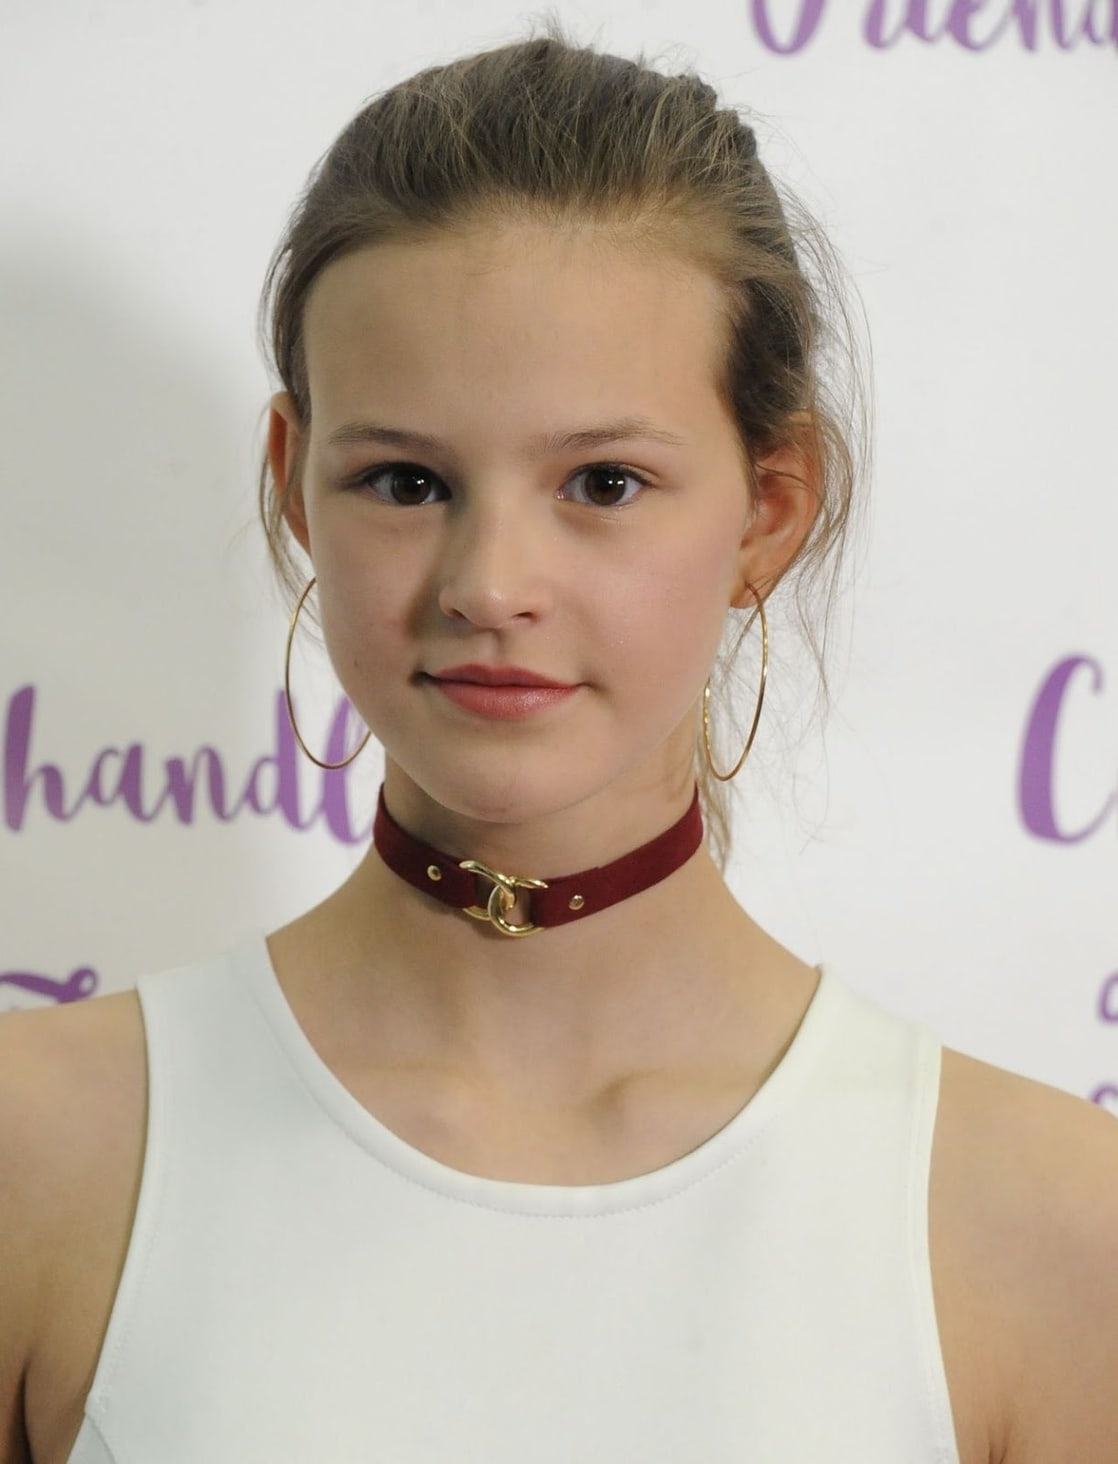 ben fleury recommends peyton kennedy sexy pic